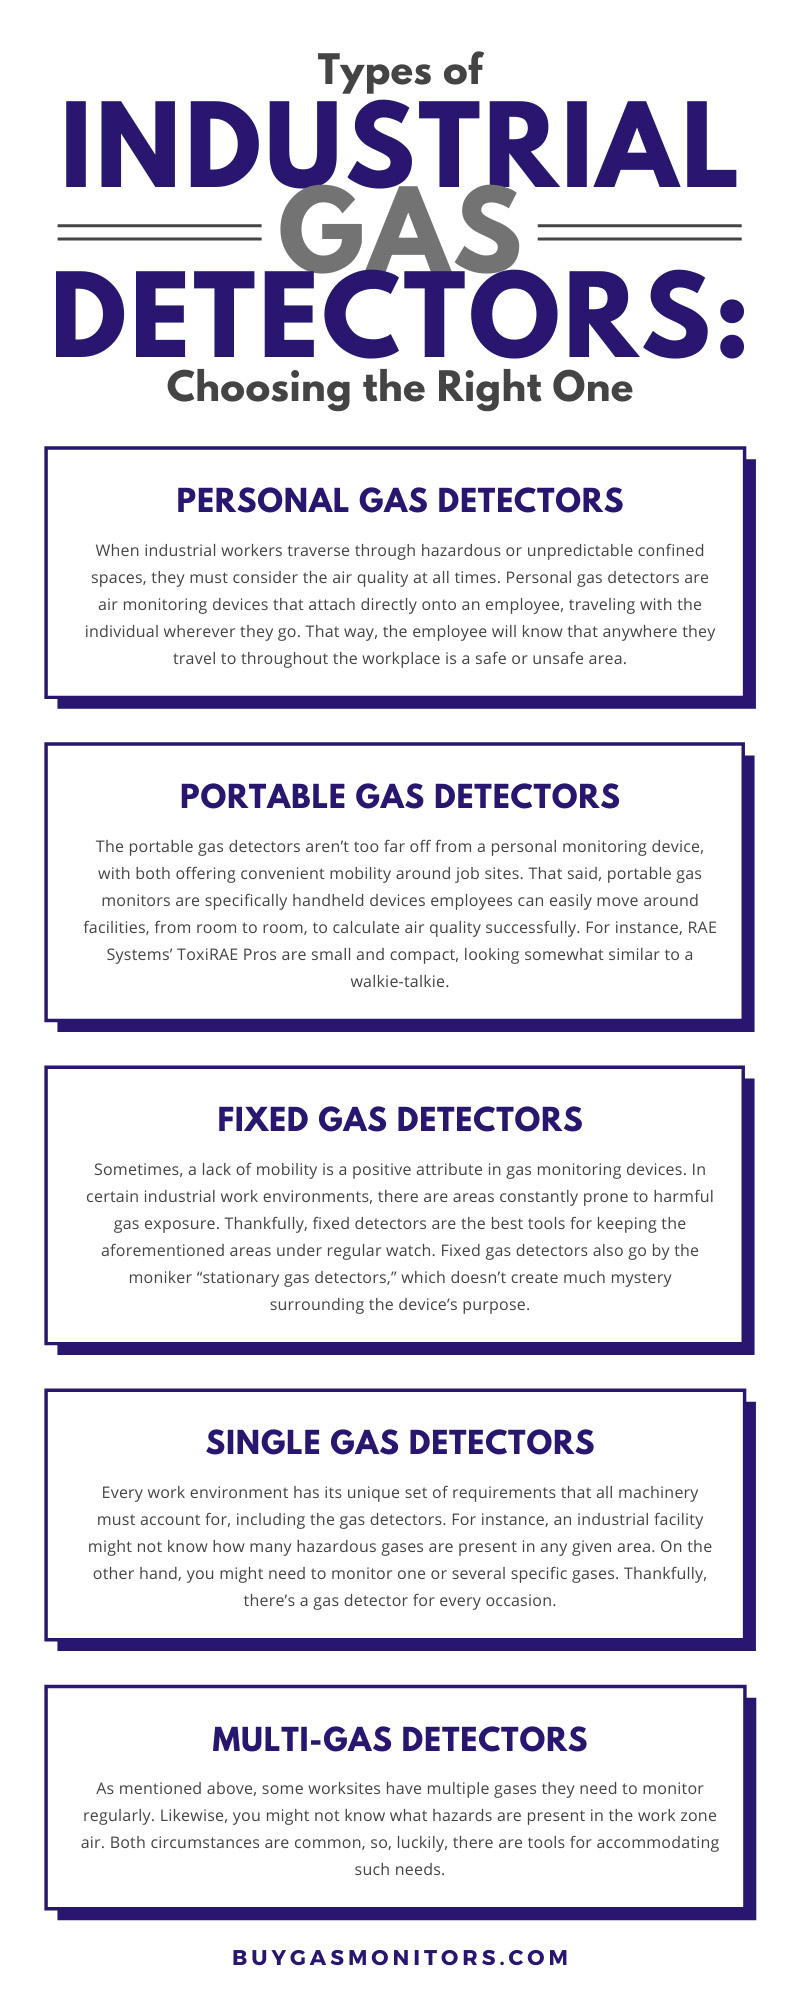 Types of Industrial Gas Detectors: Choosing the Right One